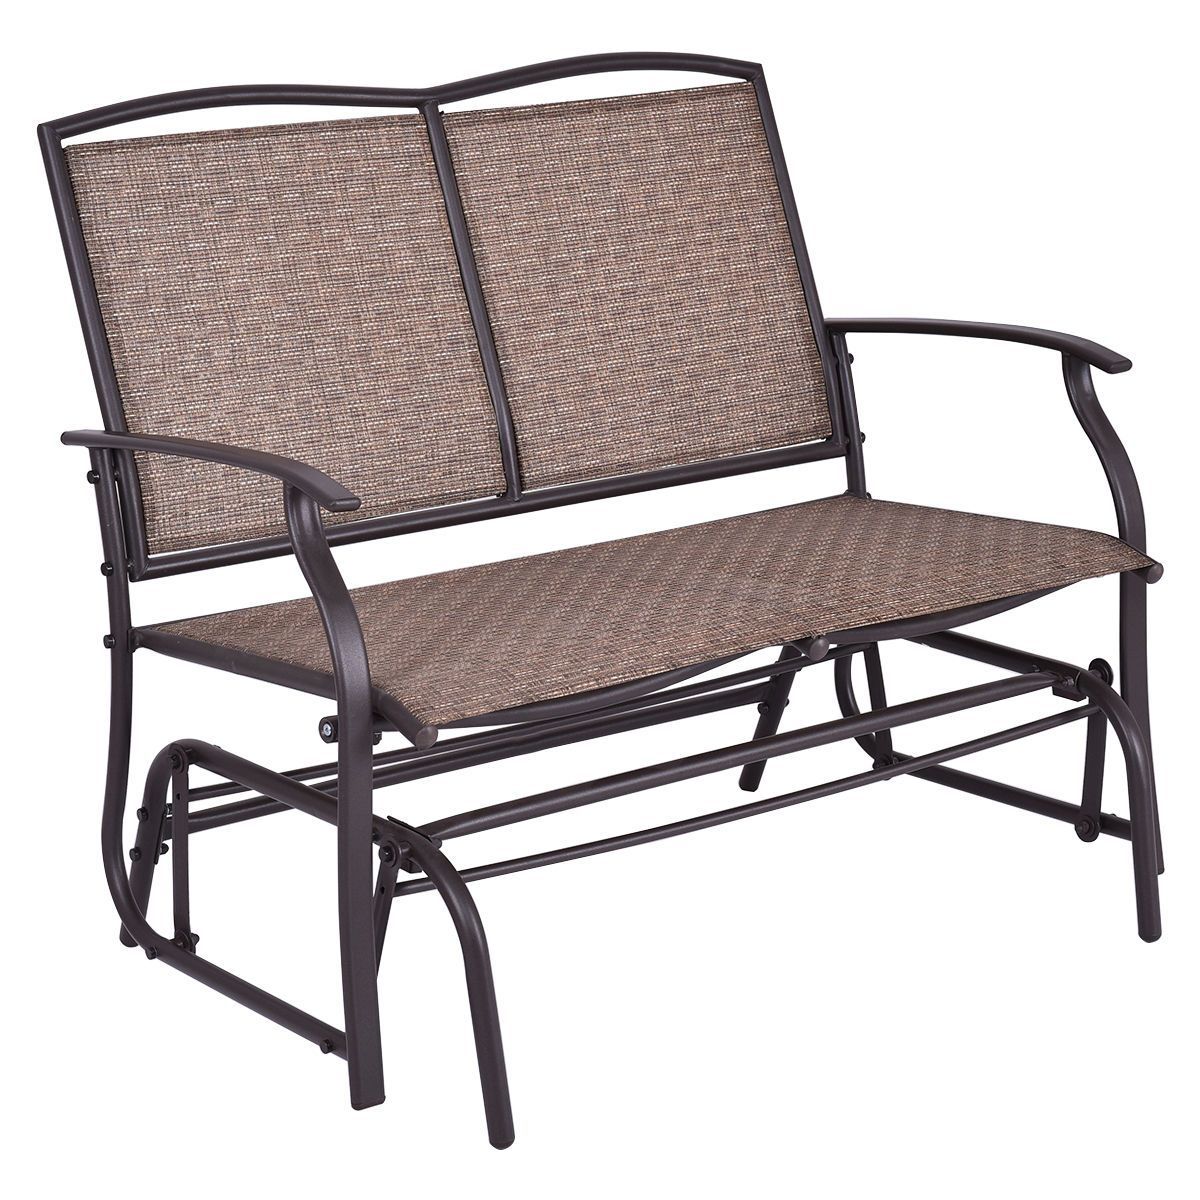 Patio Glider Rocking 2 Person Outdoor Bench | Beach Patios Intended For Outdoor Patio Swing Glider Bench Chair S (View 9 of 25)